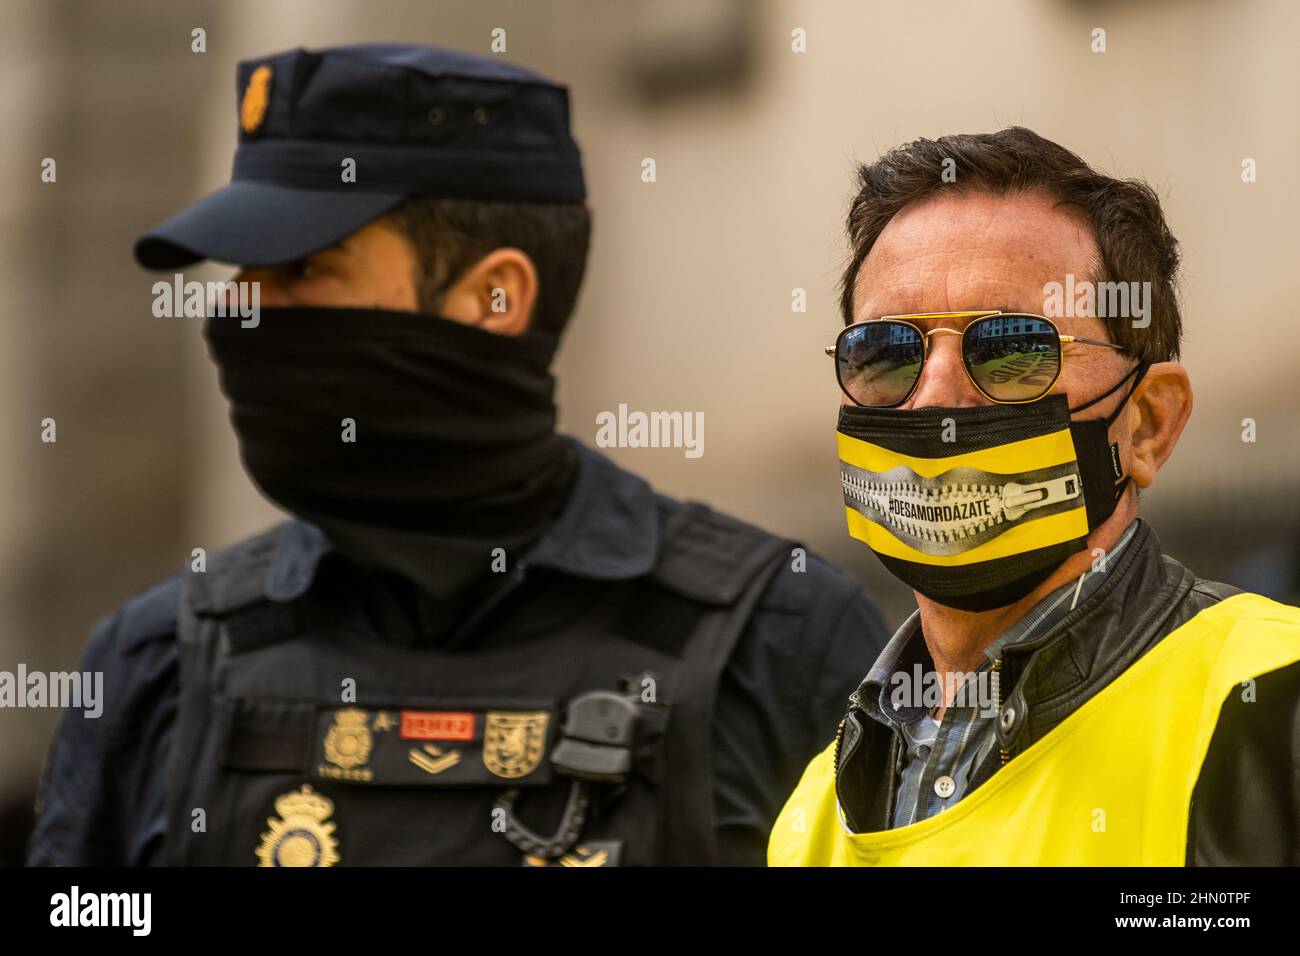 Madrid, Spain. 13th Feb, 2022. A man with the word 'ungag' on his face mask is seen near a police officer during a demonstration against the Citizen Security Law known as Gag Law (Ley Mordaza). The citizen platform 'No Somos Delito', together with groups, organizations and social movements that work for the defense of Human Rights, have called for a demonstration to demand that the reform of the Gag Law proposed by Government respond to some minimums that guarantee the free exercise of fundamental rights. Credit: Marcos del Mazo/Alamy Live News Stock Photo